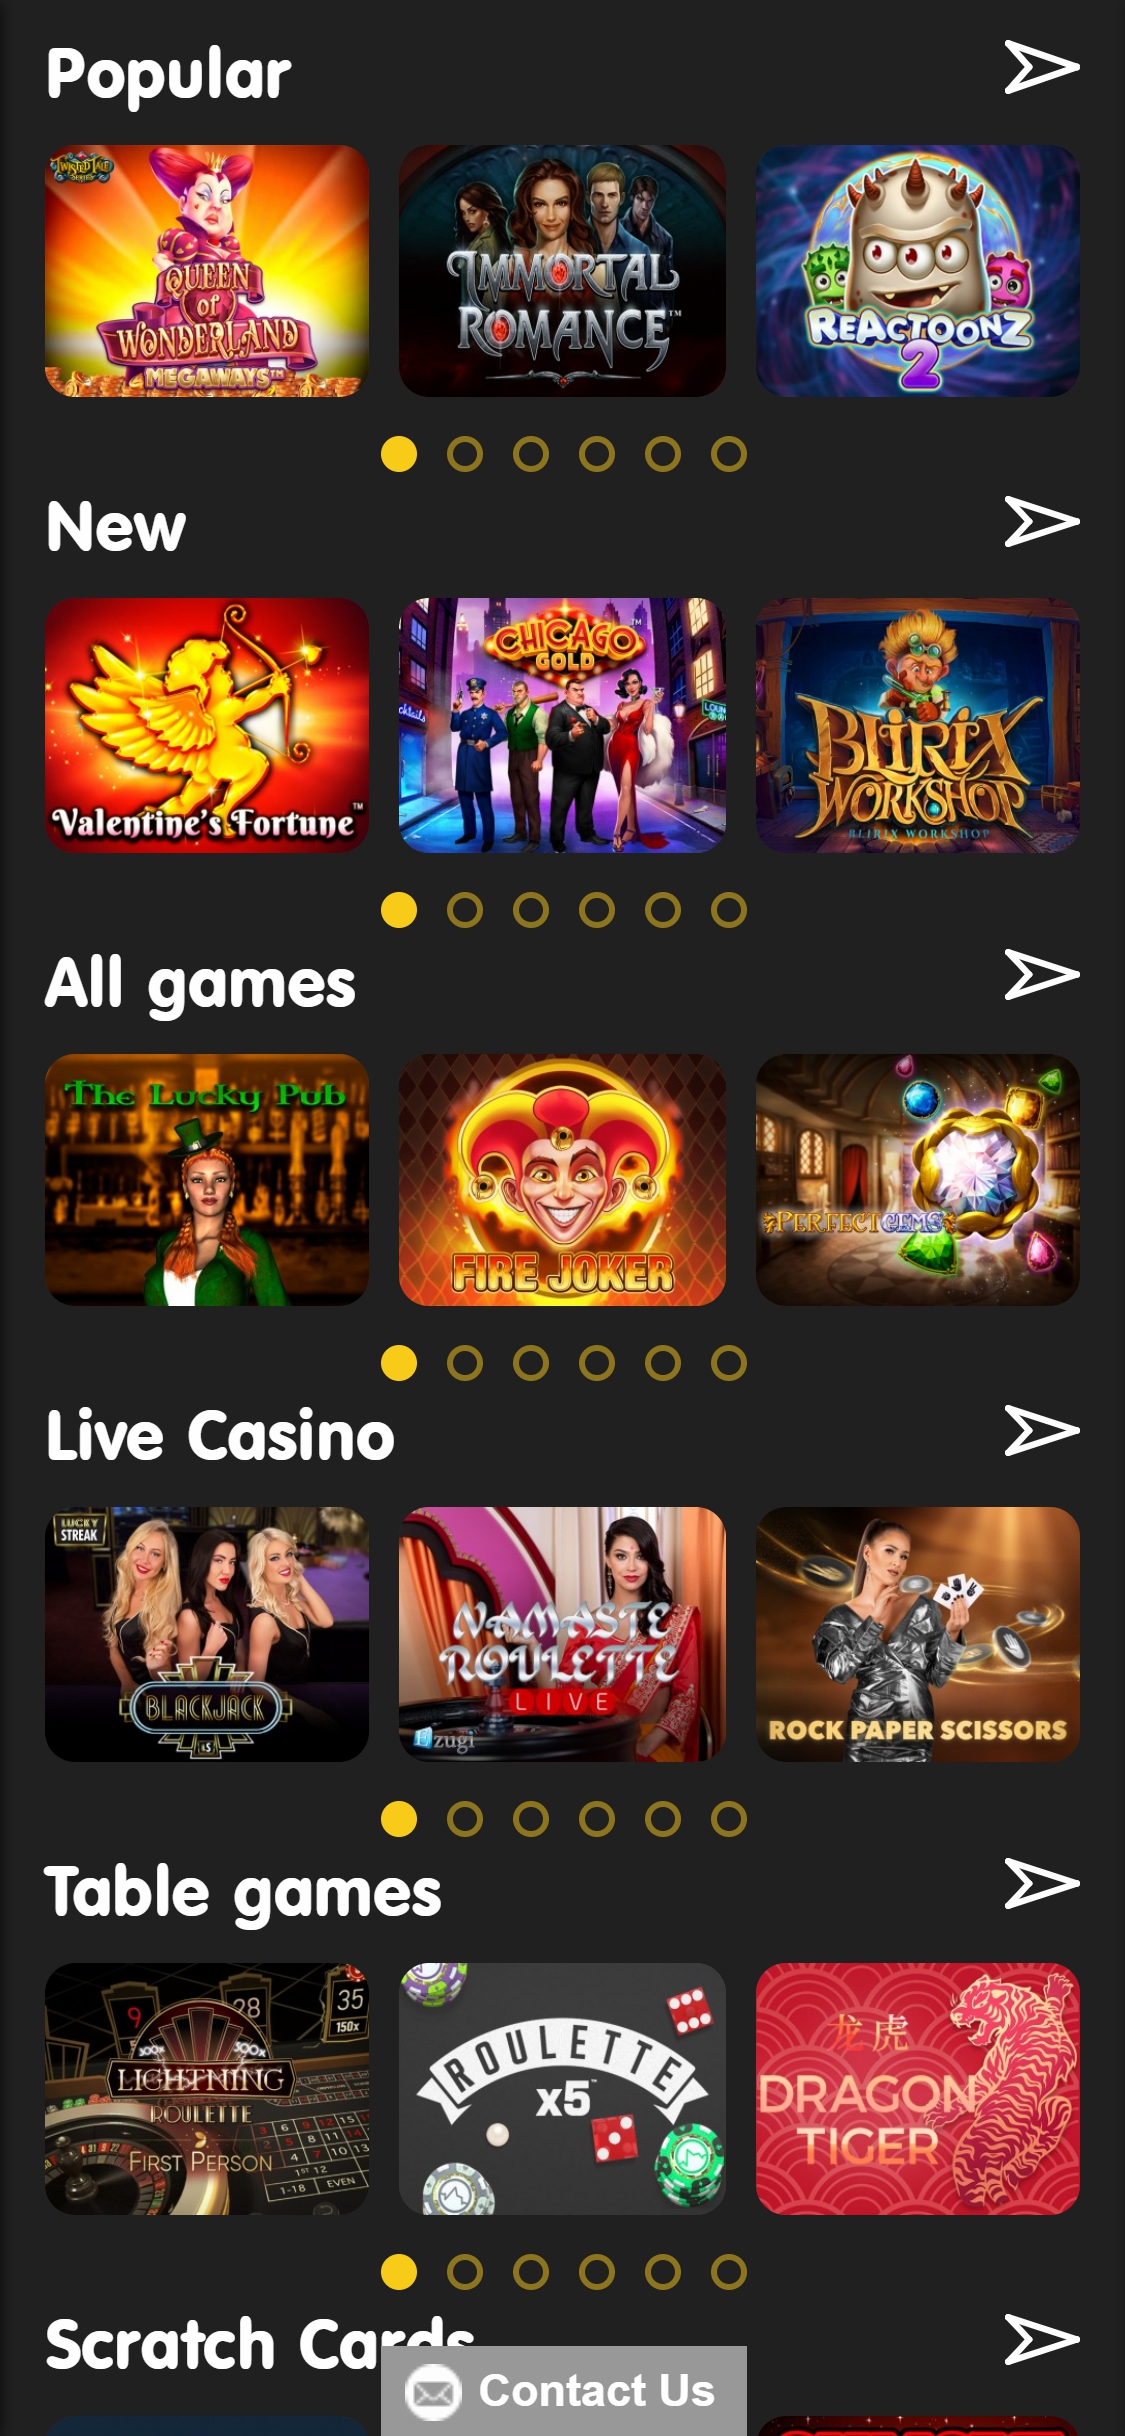 24KCasino Mobile Games Review